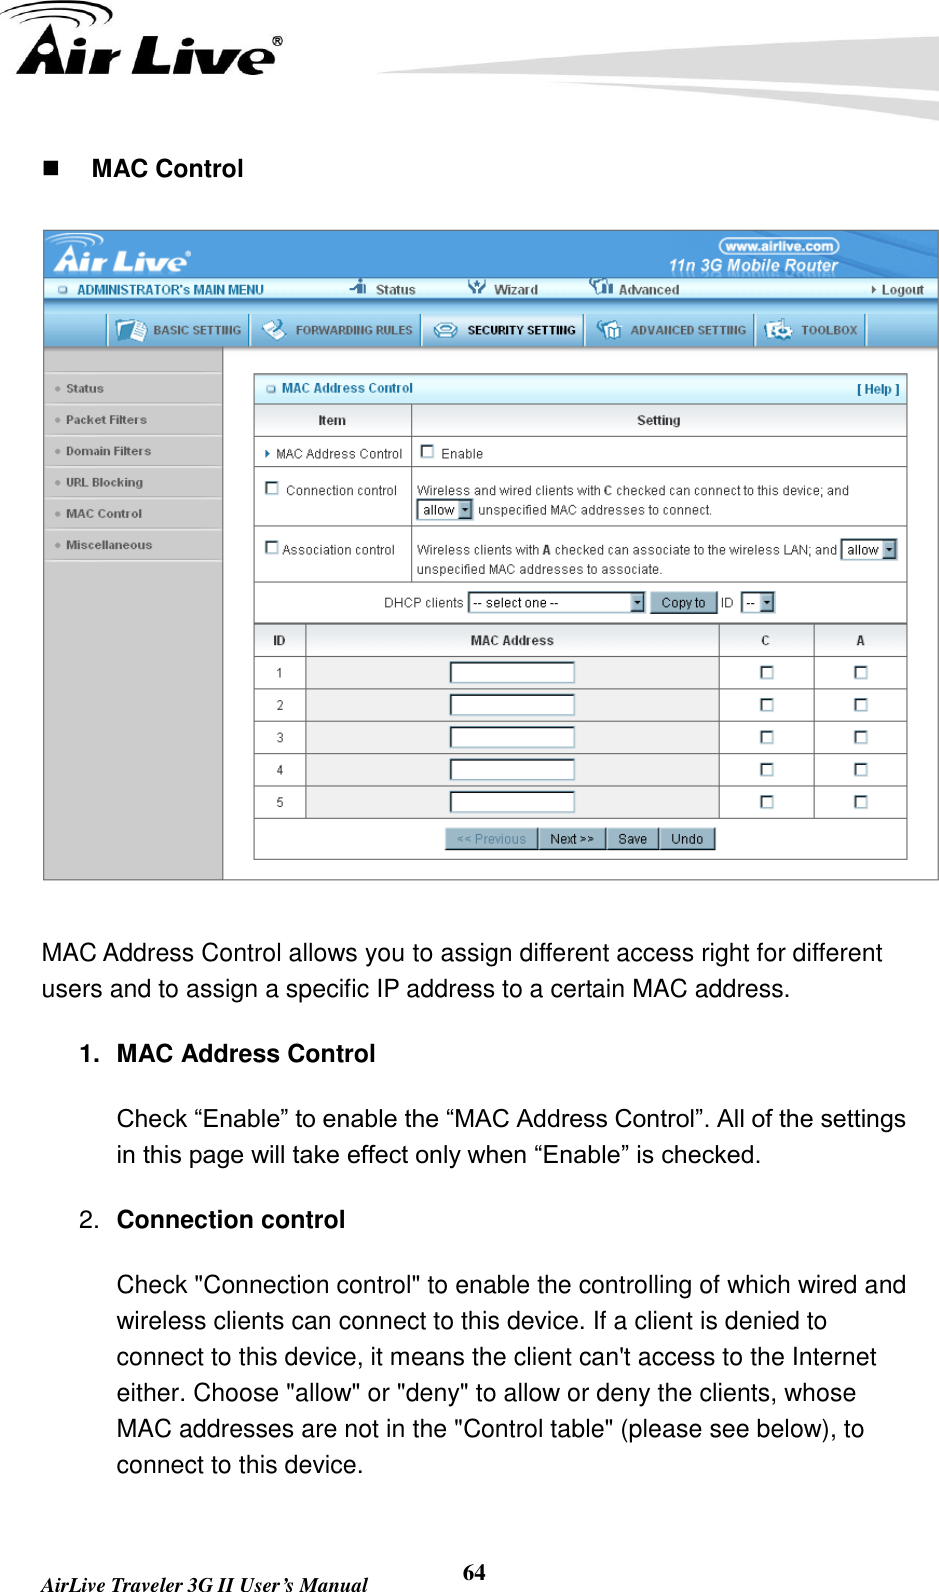   AirLive Traveler 3G II User’s Manual 64  MAC Control  MAC Address Control allows you to assign different access right for different users and to assign a specific IP address to a certain MAC address. 1.  MAC Address Control Check “Enable” to enable the “MAC Address Control”. All of the settings in this page will take effect only when “Enable” is checked. 2. Connection control   Check &quot;Connection control&quot; to enable the controlling of which wired and wireless clients can connect to this device. If a client is denied to connect to this device, it means the client can&apos;t access to the Internet either. Choose &quot;allow&quot; or &quot;deny&quot; to allow or deny the clients, whose MAC addresses are not in the &quot;Control table&quot; (please see below), to connect to this device. 